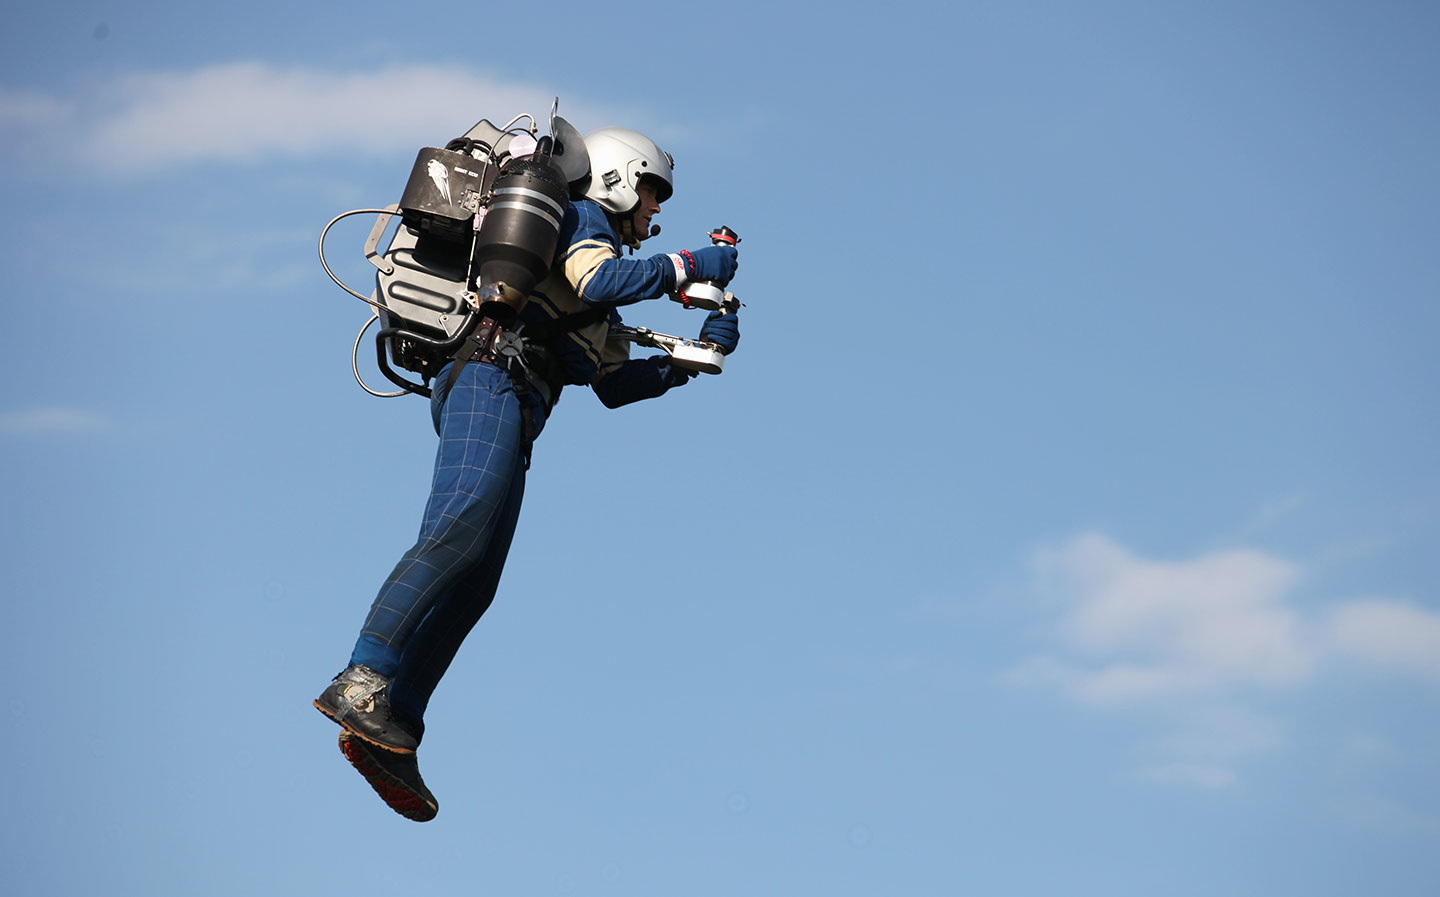 The future of transport: jetpack aviation